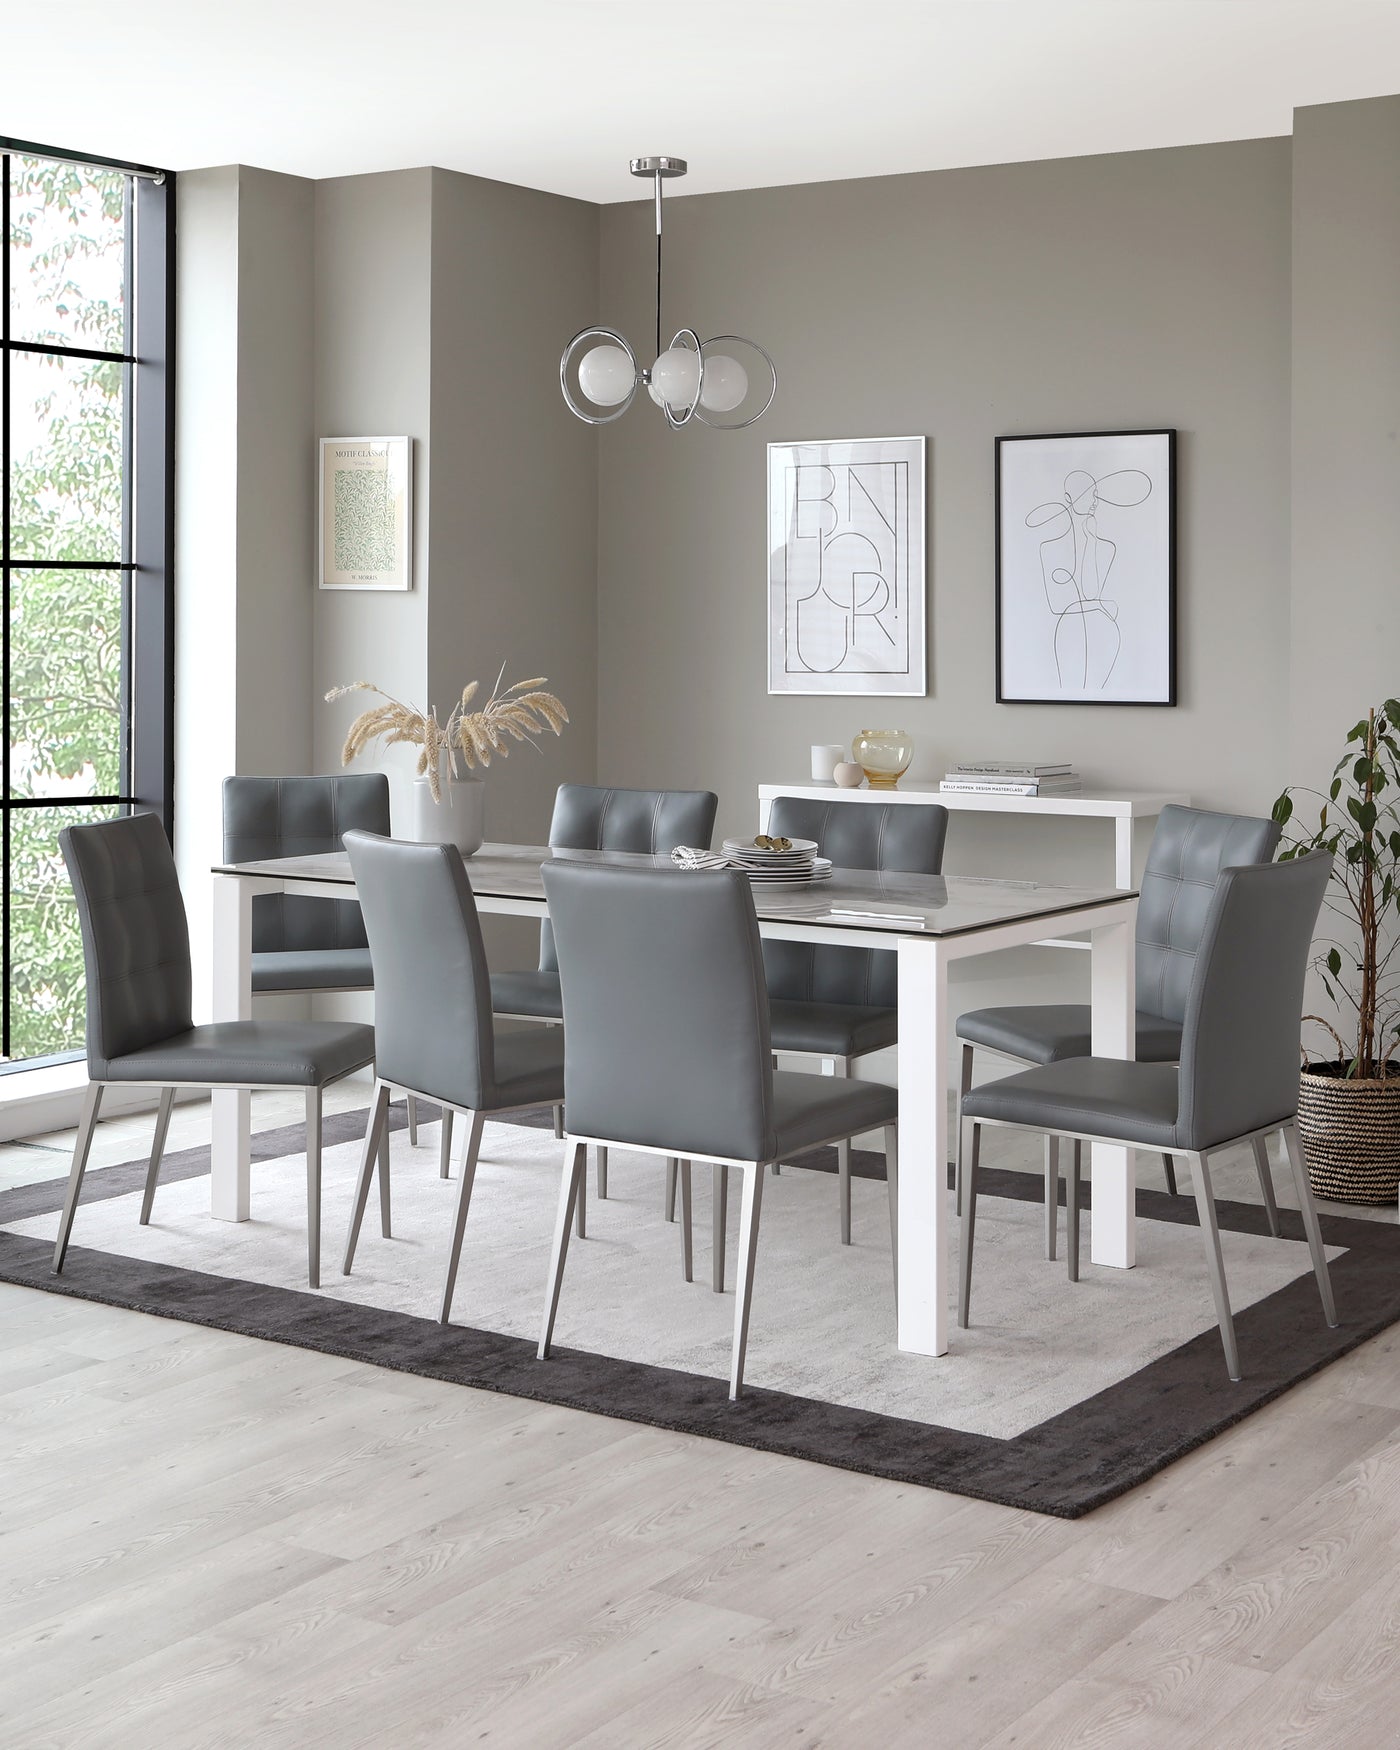 Modern dining room furniture featuring a white rectangular table with stainless steel legs, accompanied by six elegant grey upholstered chairs with sleek metal frames. The set is grounded by a two-tone area rug.